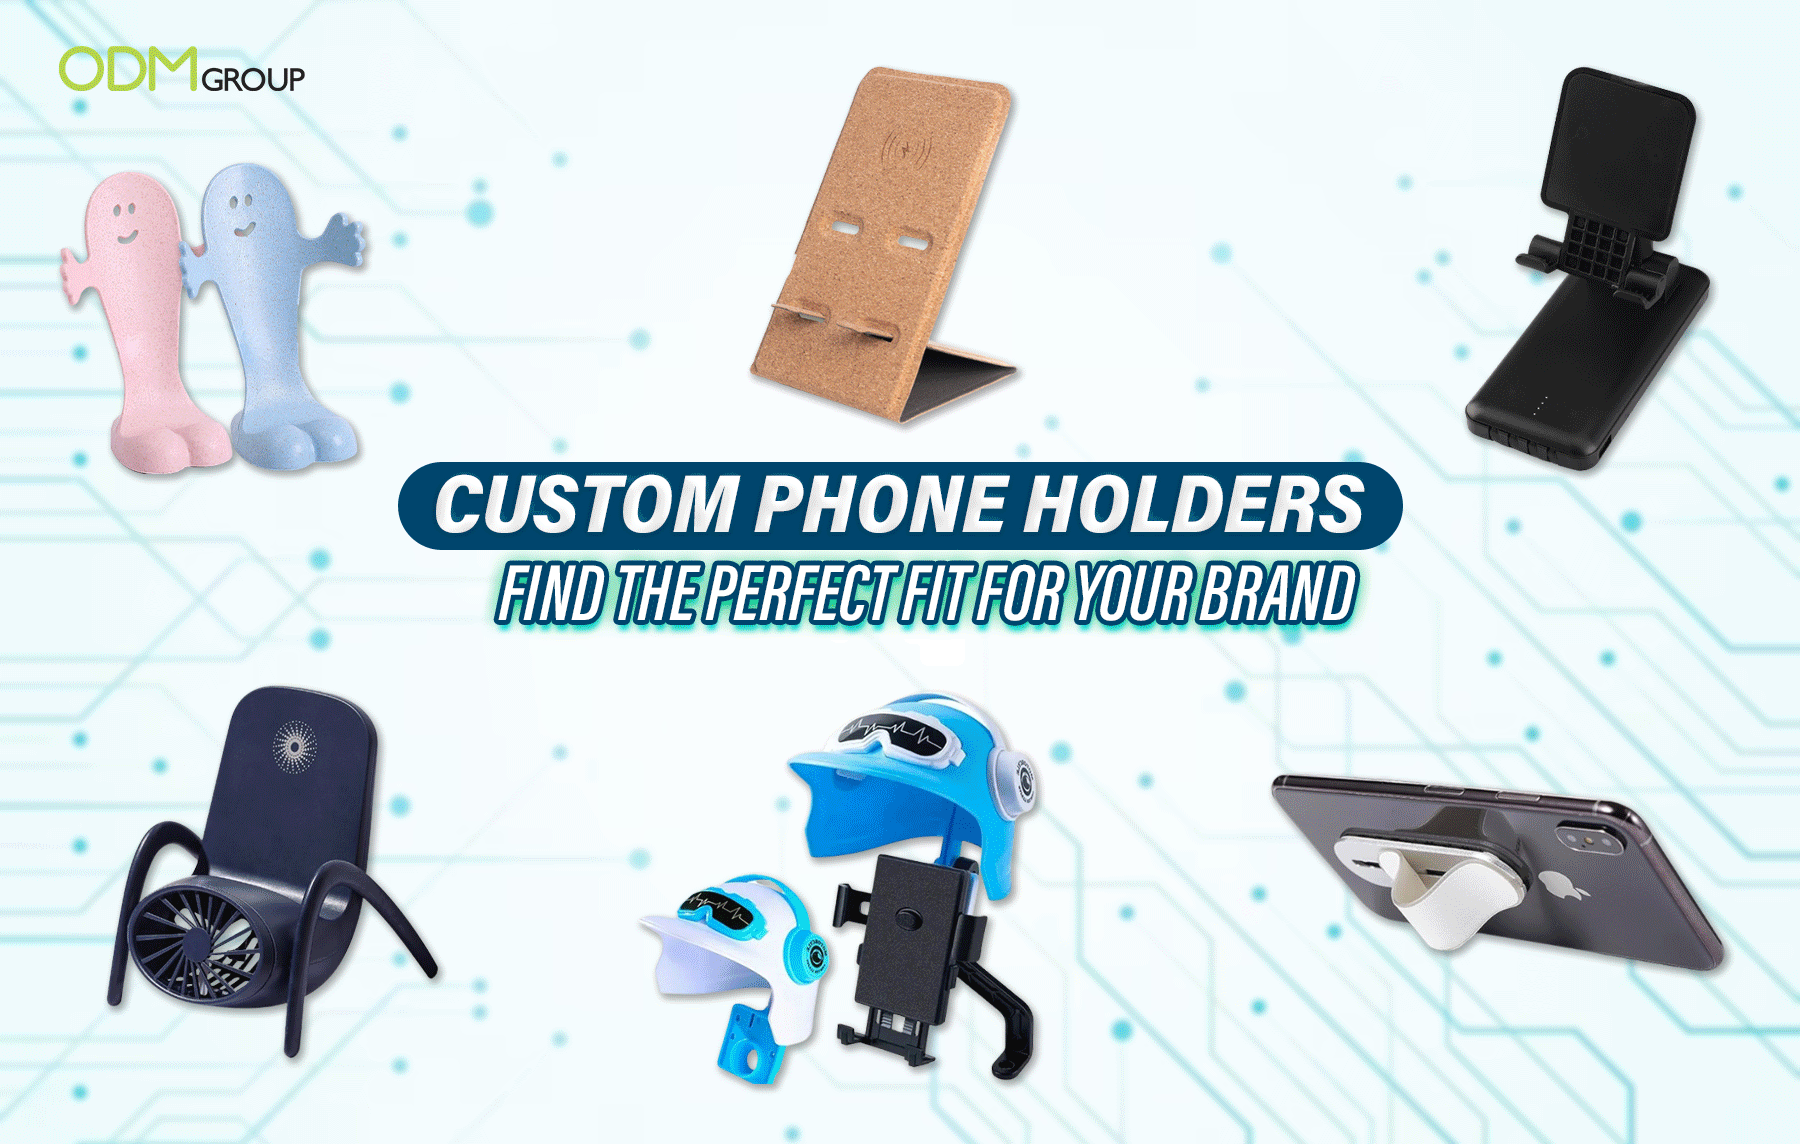 Different styles of custom phone holders.